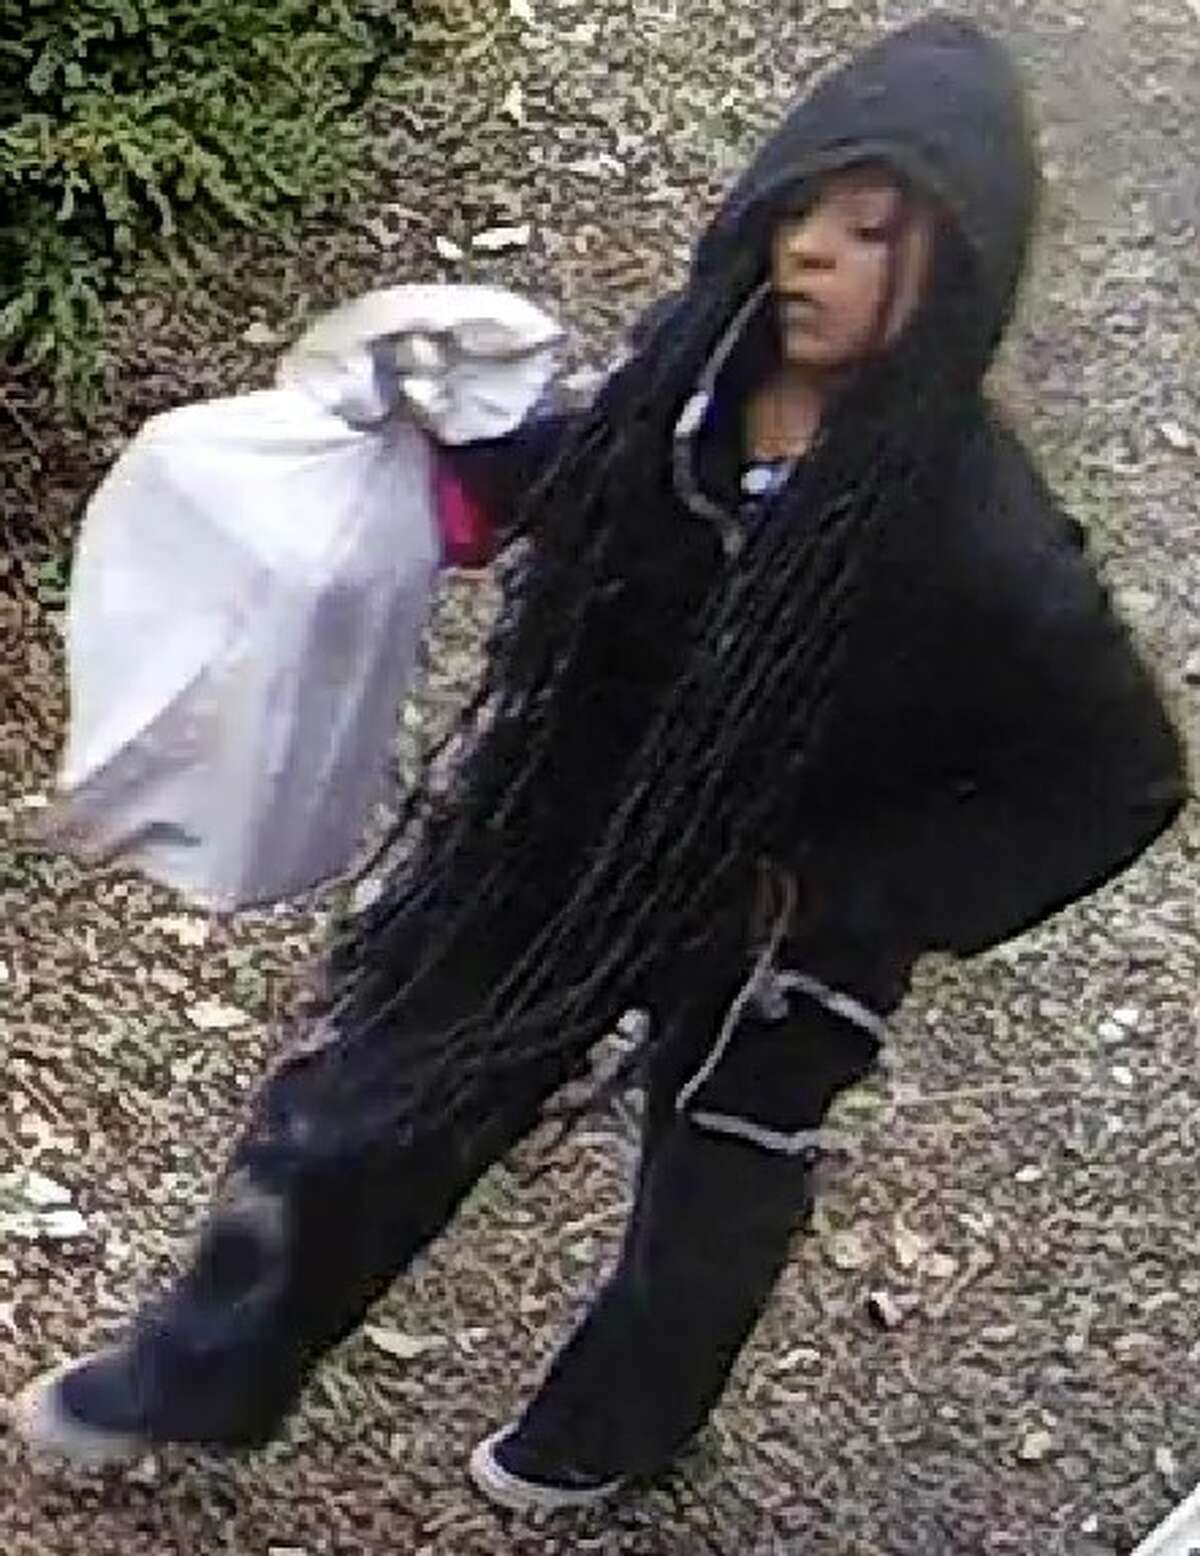 On Jan. 22, a woman stole cash from a business on Fairfield Avenue in the Black Rock neighborhood of Bridgeport, police said.